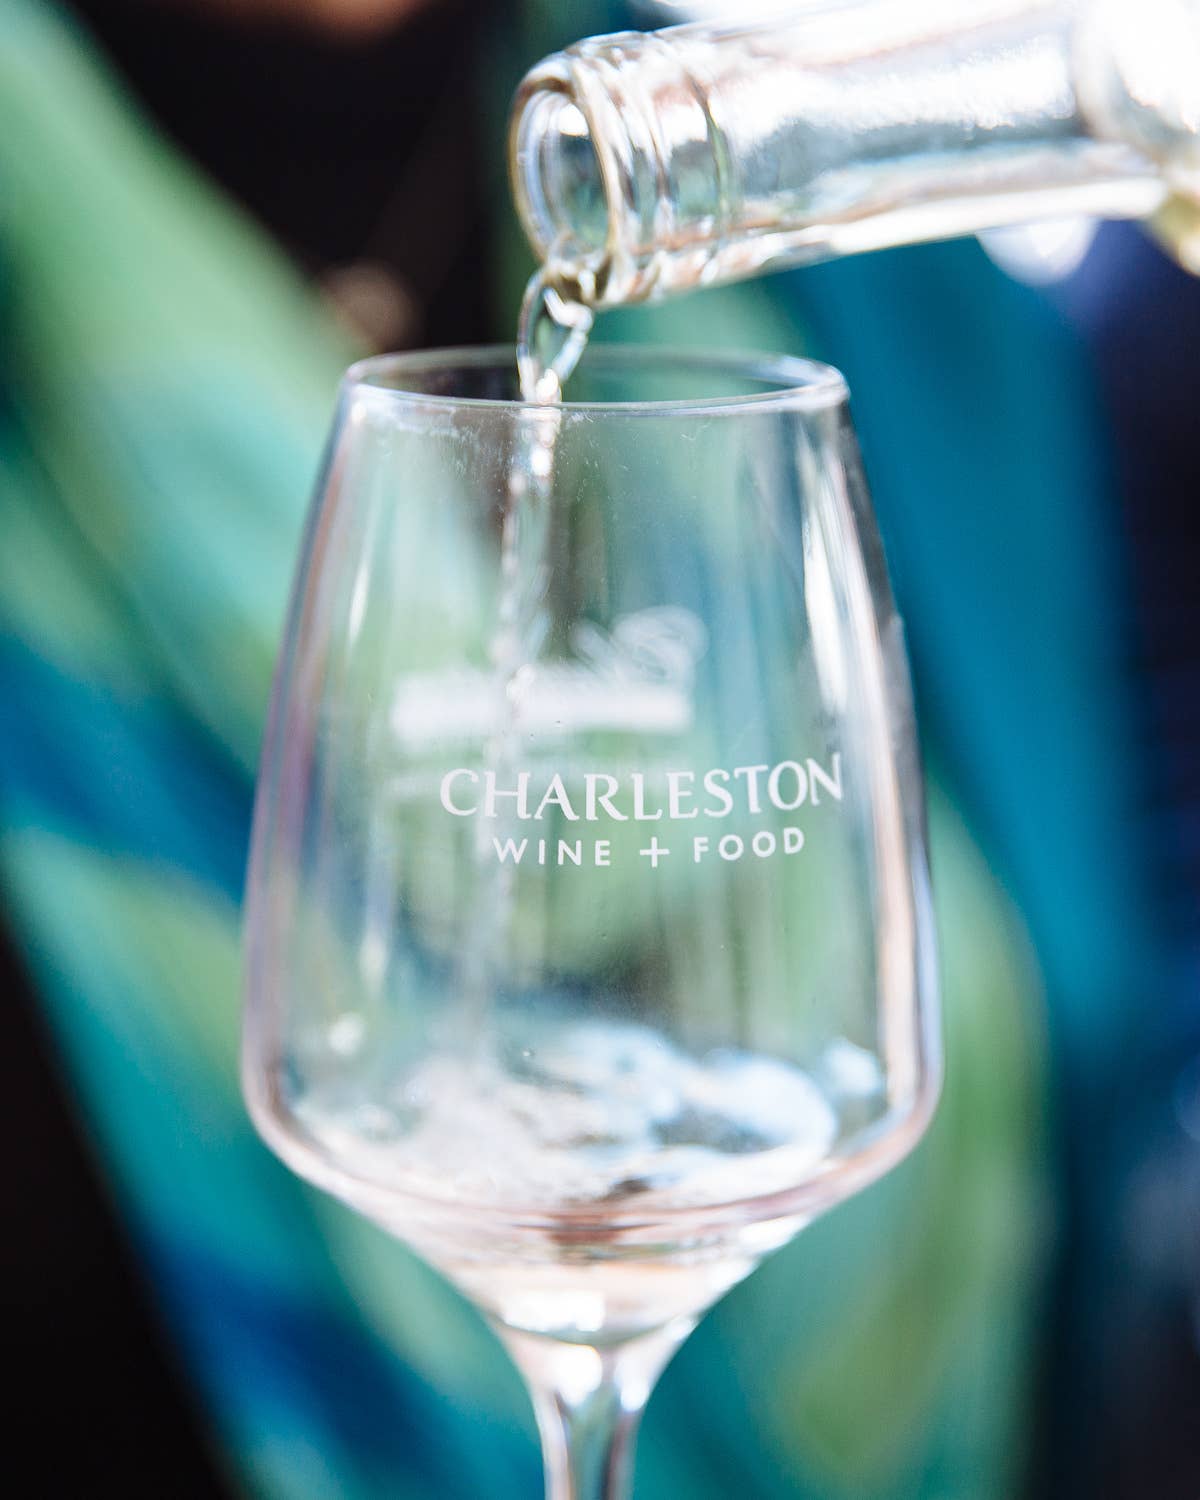 Our Best Photos From the Charleston Wine + Food Festival 2017